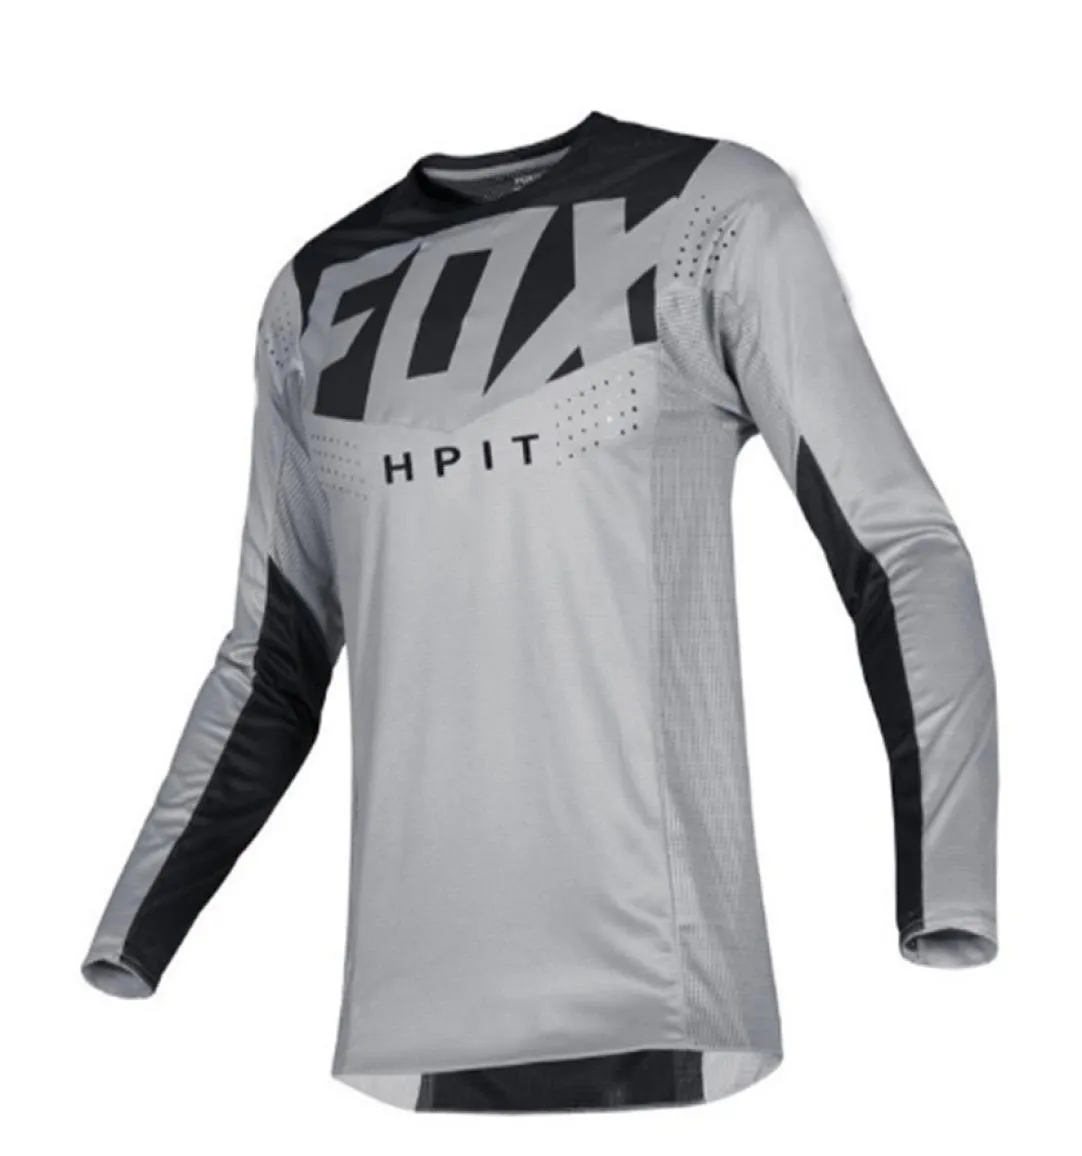 Hpit Fox New Long Sleeve Downhill Jersey Jersey Mountain Bike T Shirt Mtb Maillot Bicycle Shird Uniform Cycling Clothing Motorcycle Cloth6122401